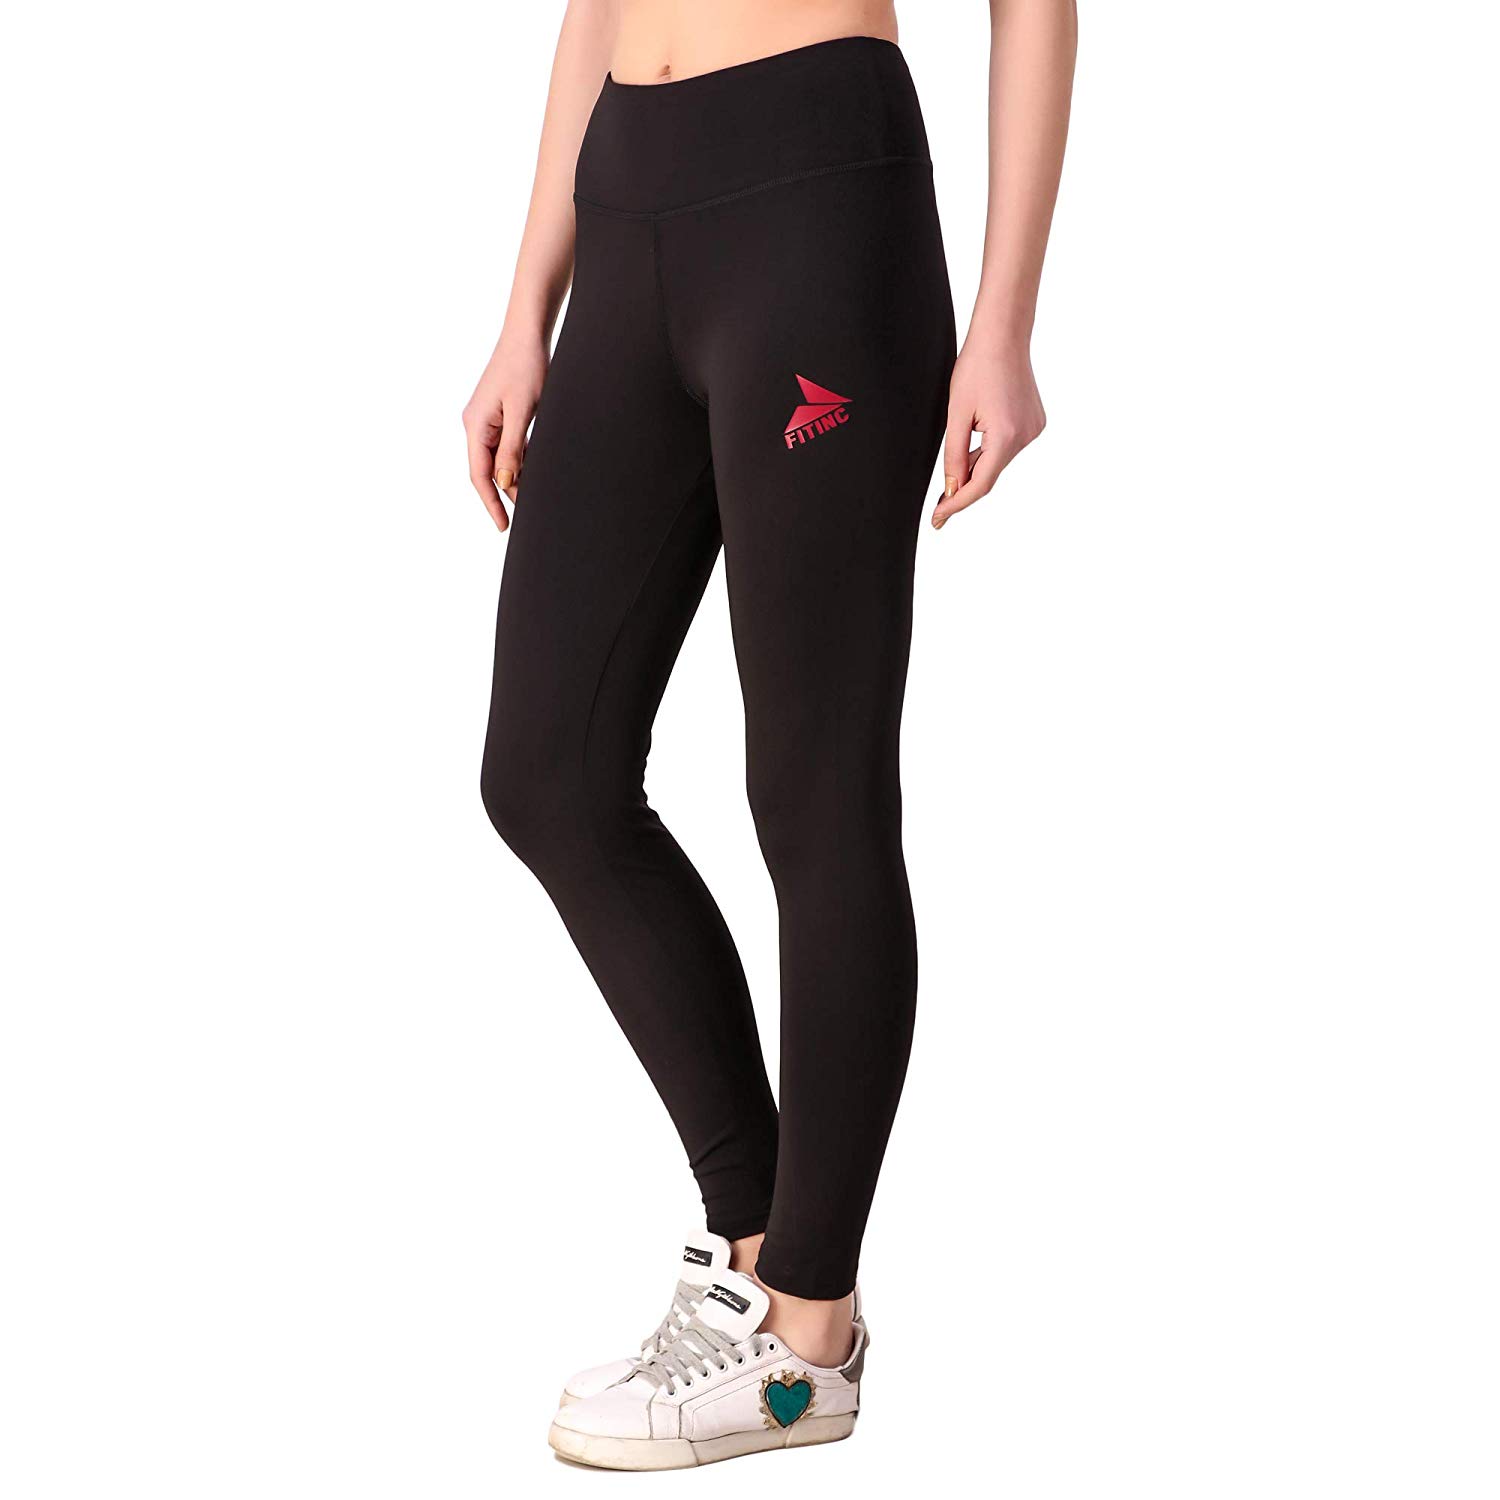 Gym Pants for Ladies Manufacturers, Custom Gym Pants for Ladies Suppliers  Exporters Australia